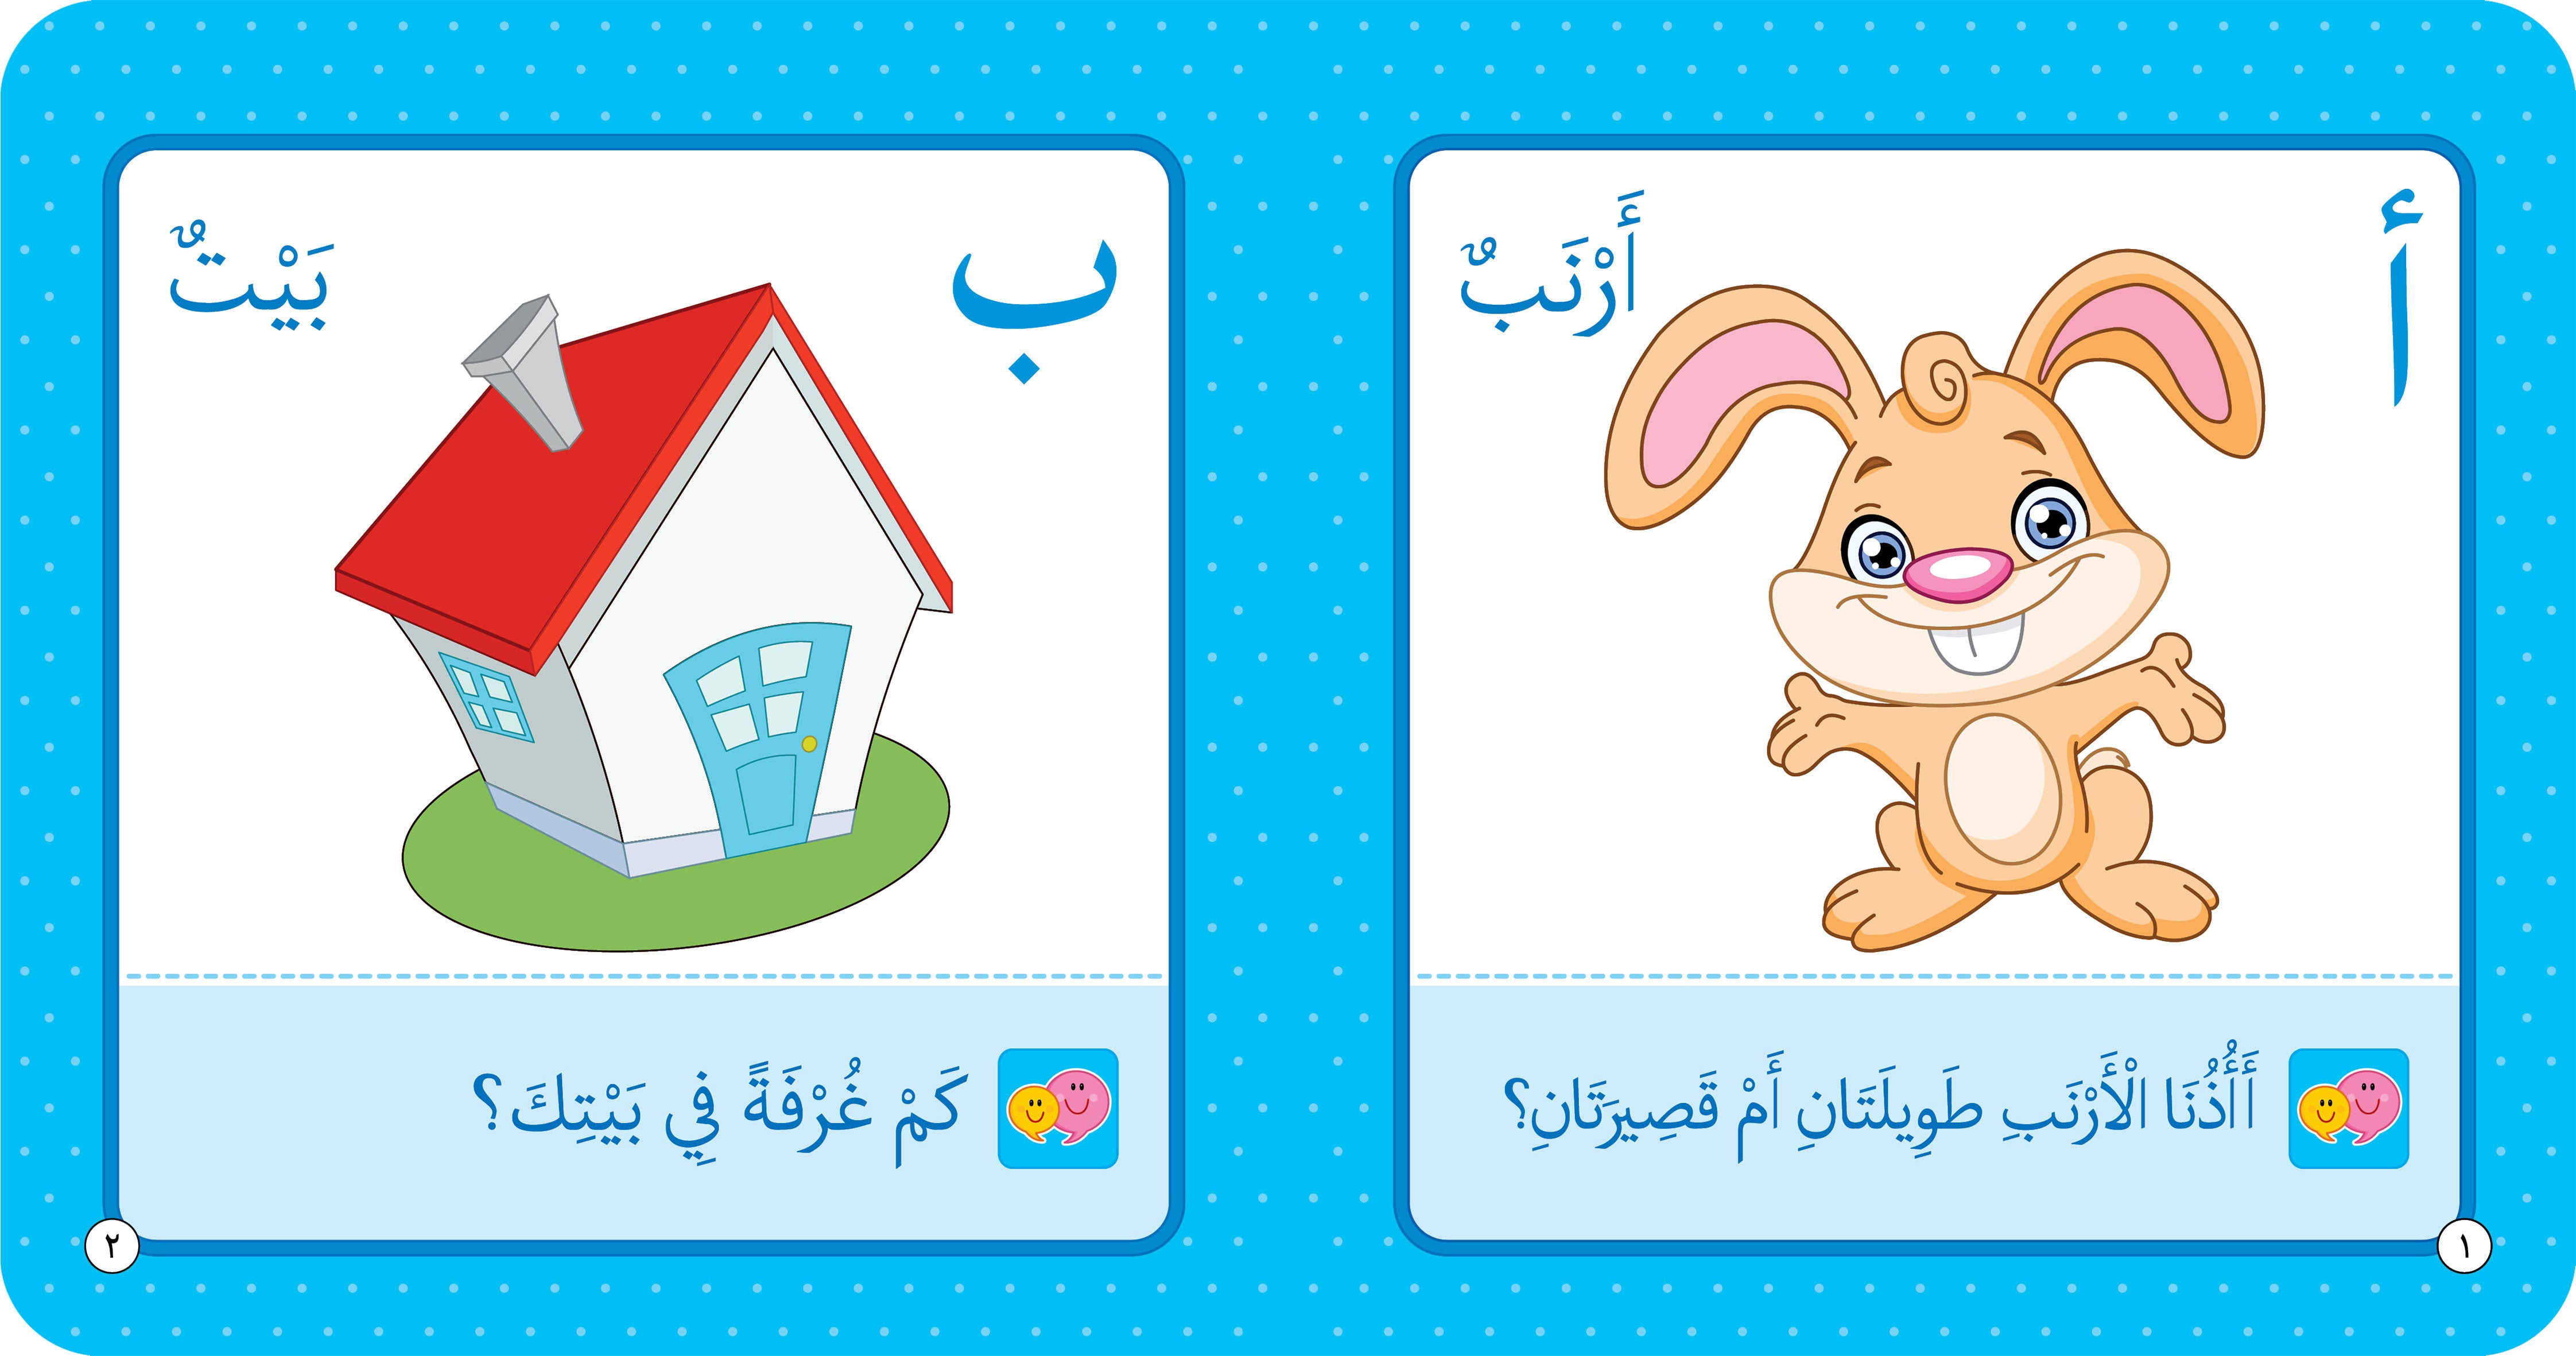 Arabic Alphabet – Educational Book in Arabic for Early Learners